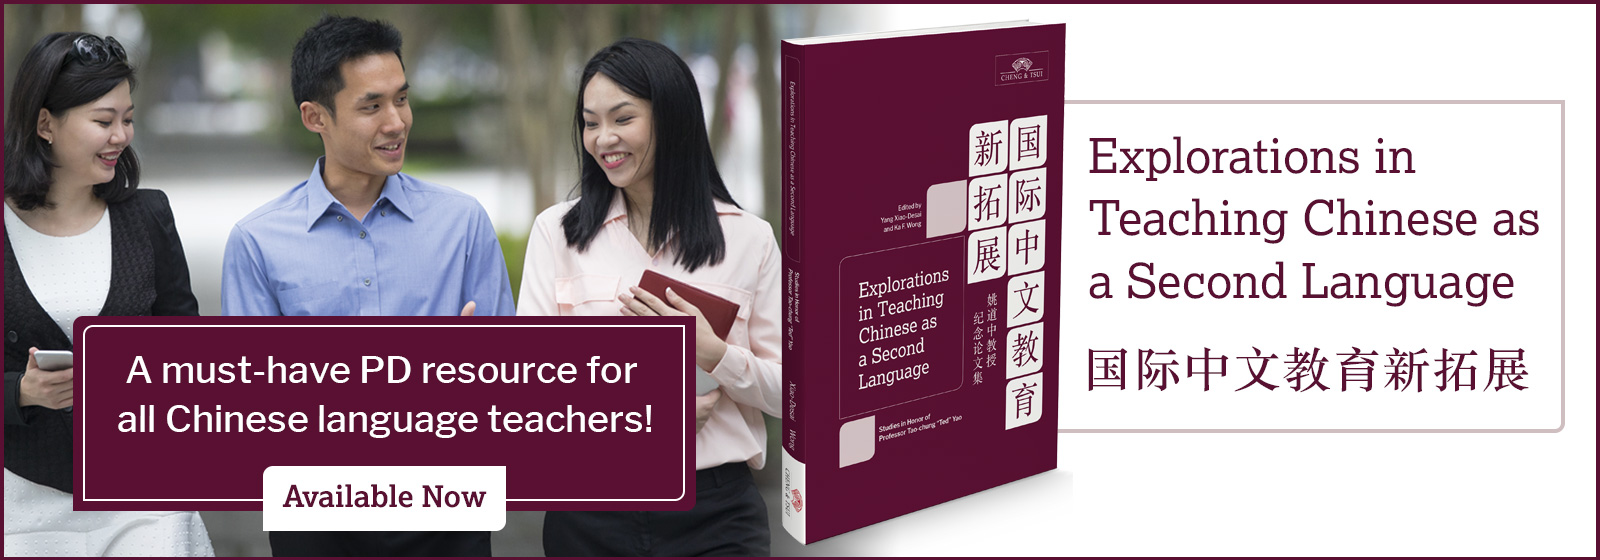 Explorations in Teaching Chinese as a Second Language